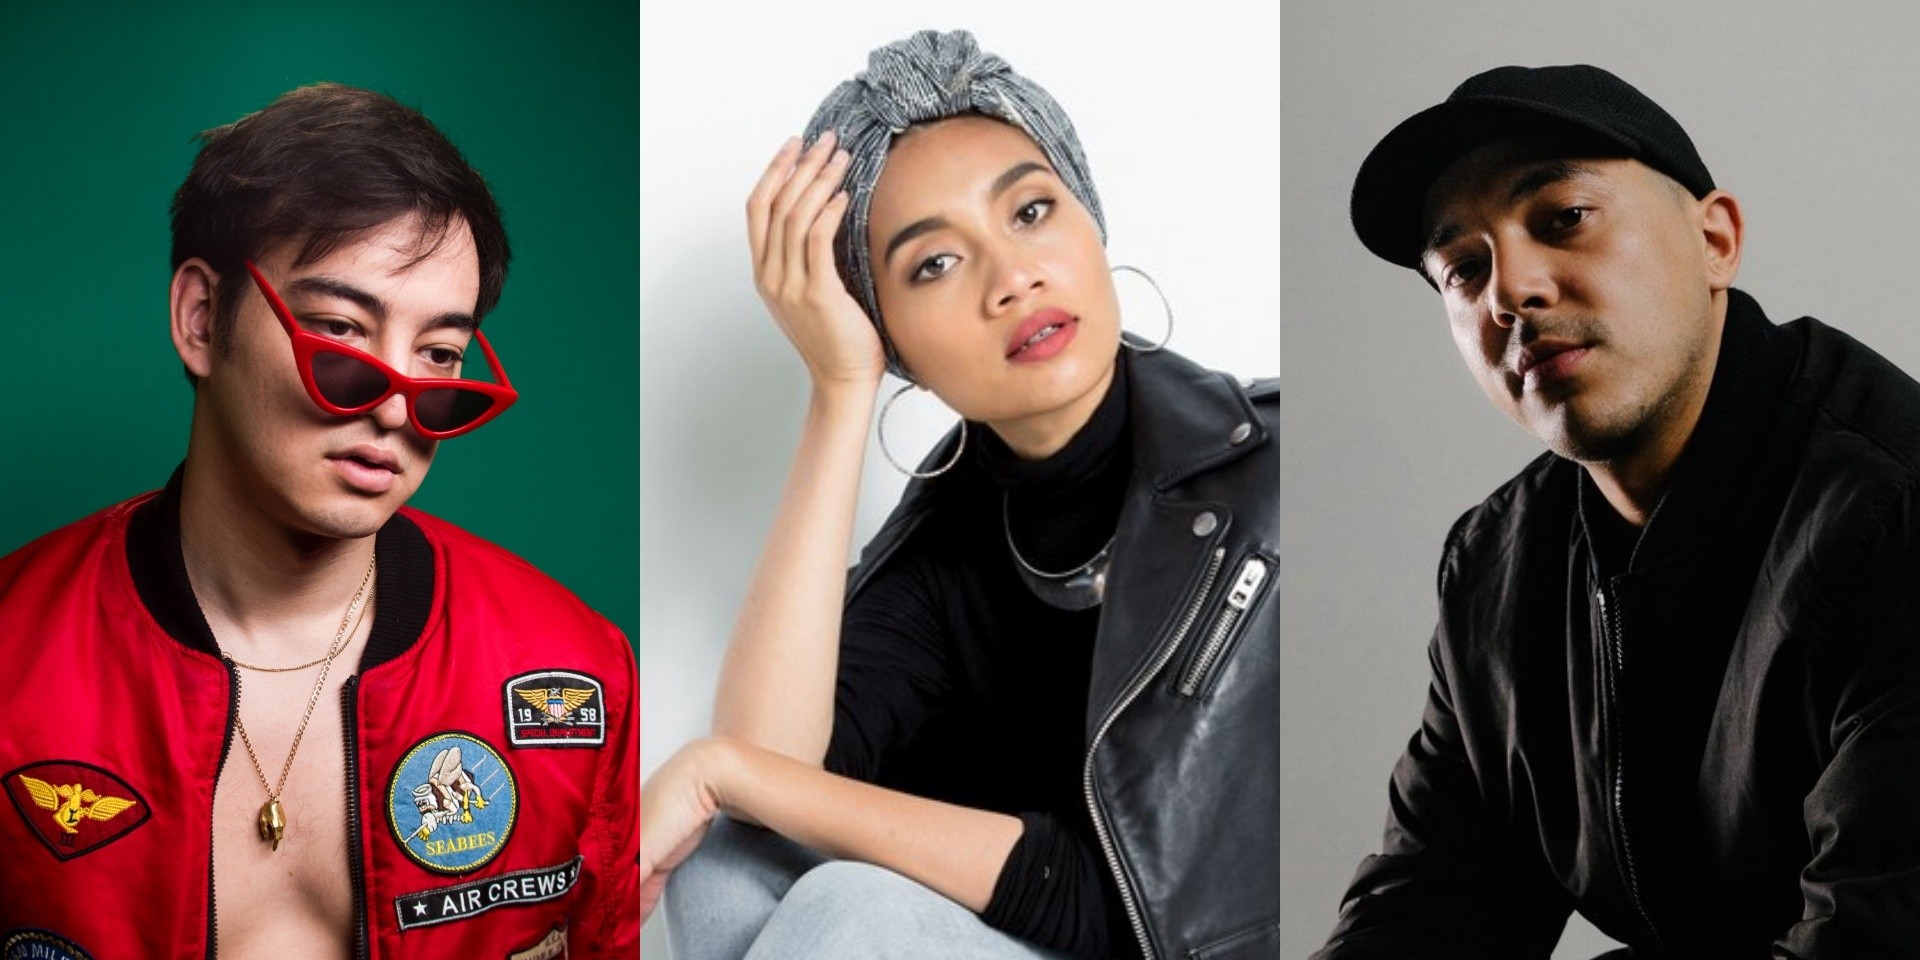 Good Vibes Festival 2019 announces second wave lineup and additional Boiler Room stage – Yuna, Joji, SonaOne, BAYNK, and more confirmed